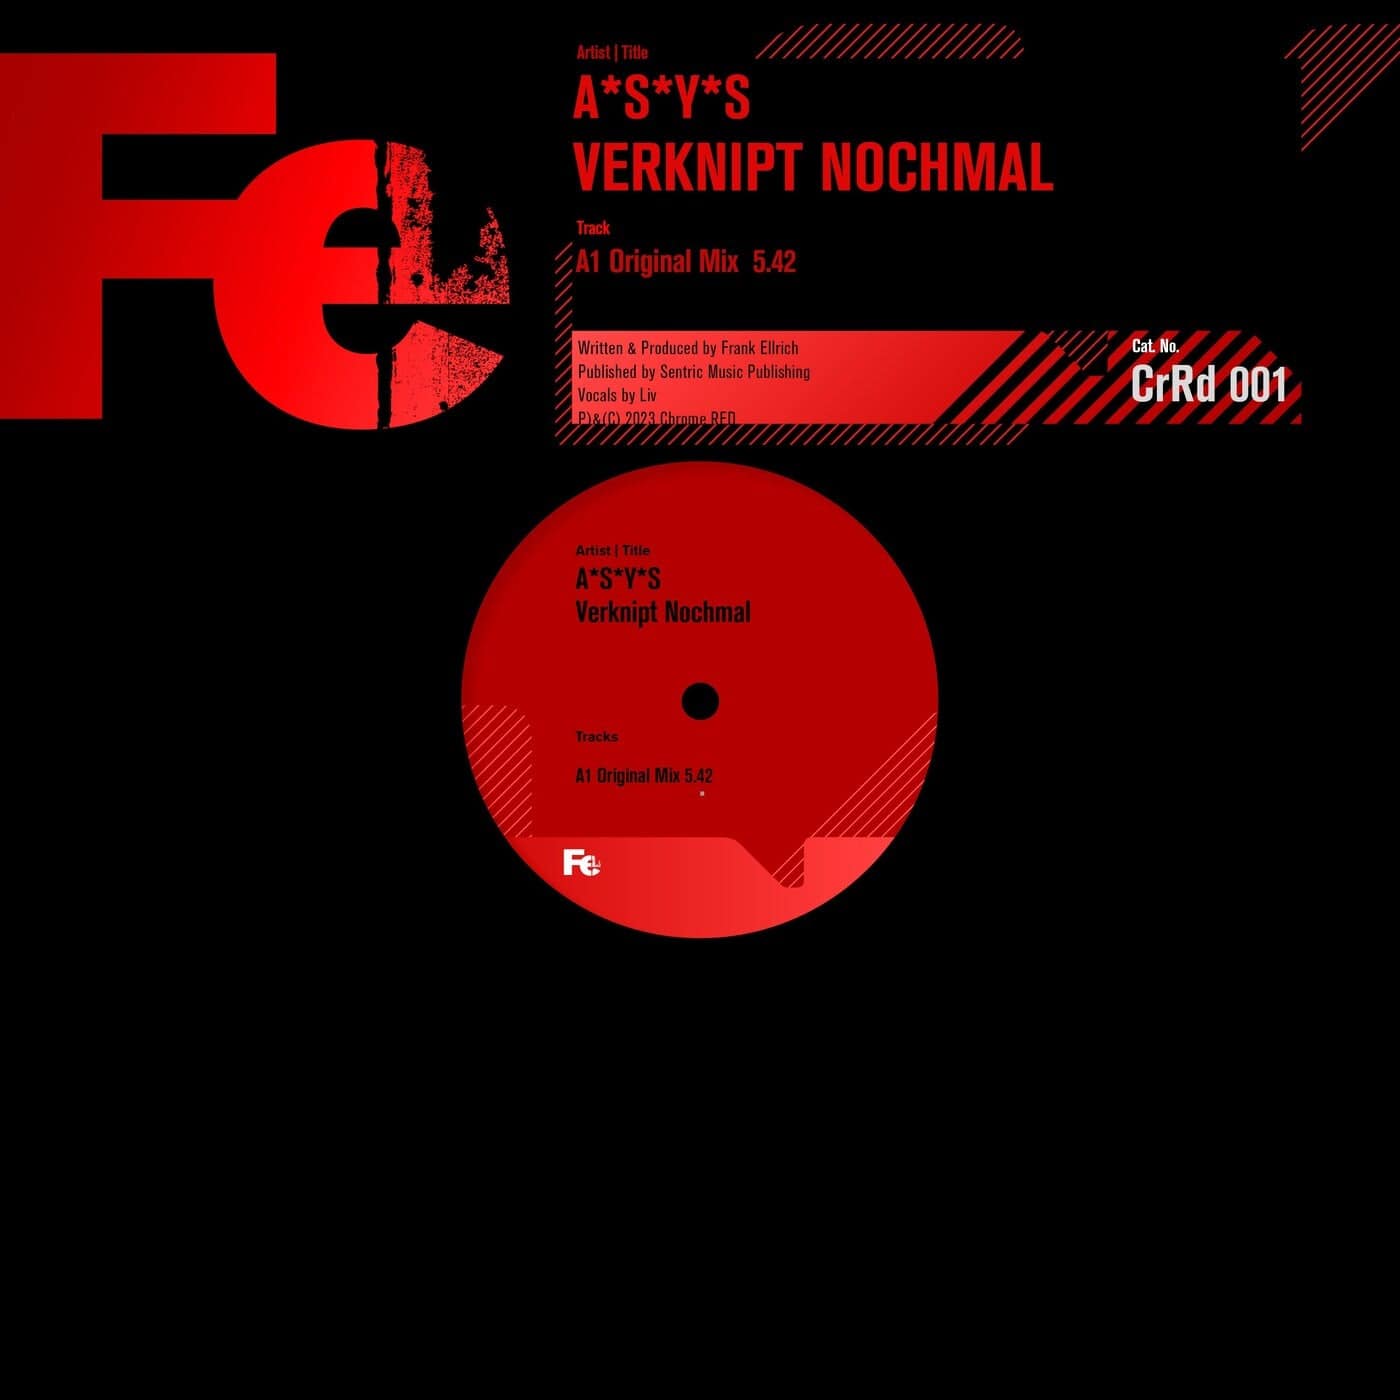 image cover: Verknipt Nochmal by A*S*Y*S on Chrome Red